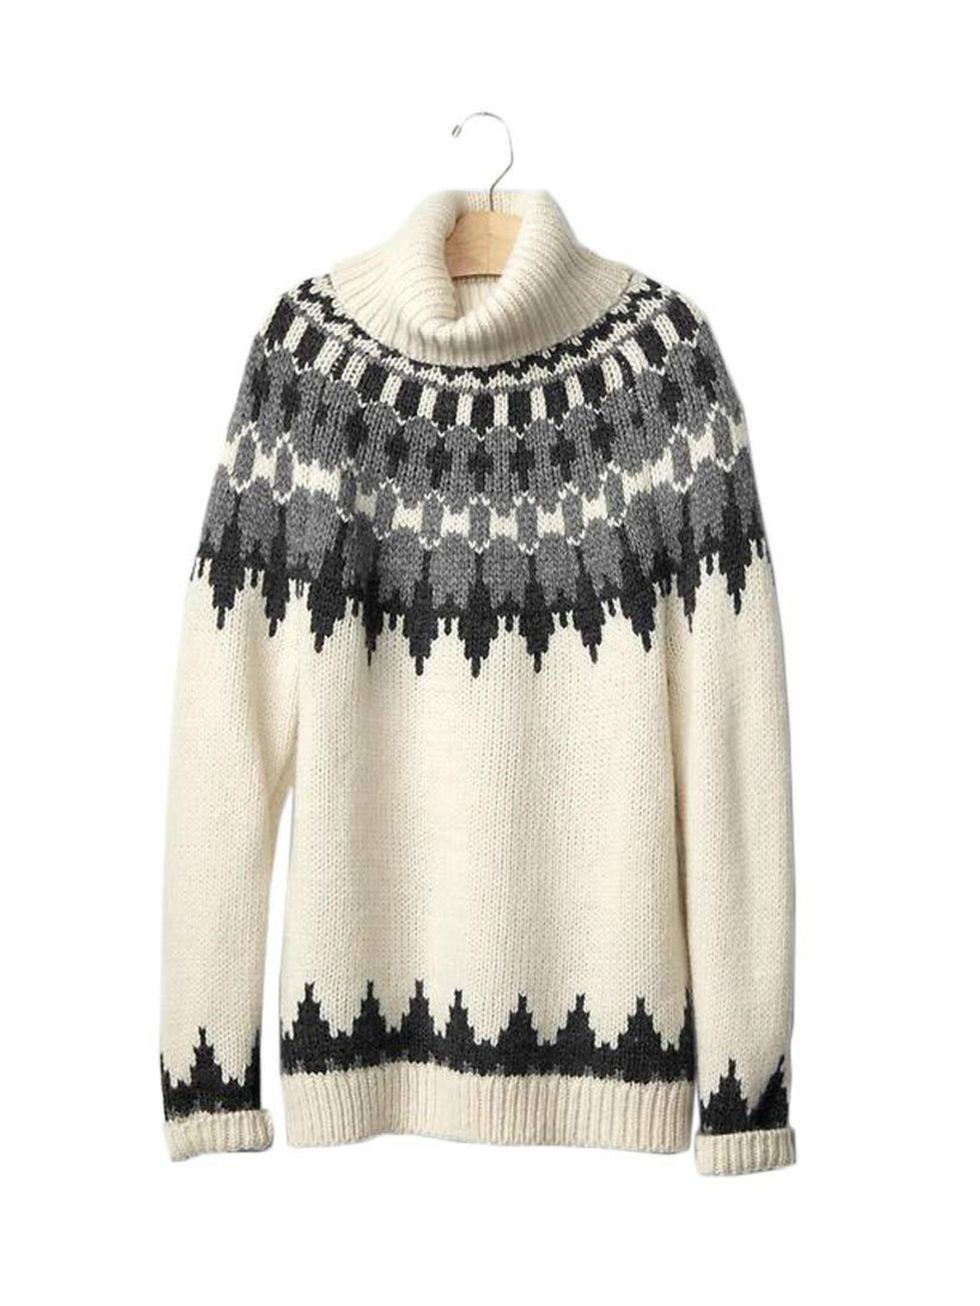 <p>Chief Sub-Editor (and Scot) Fern Ross knows her knitwear.</p>

<p><a href="http://www.gap.co.uk/browse/product.do?cid=1024085&vid=1&pid=000139737001" target="_blank">Gap</a> jumper, £59.95</p>